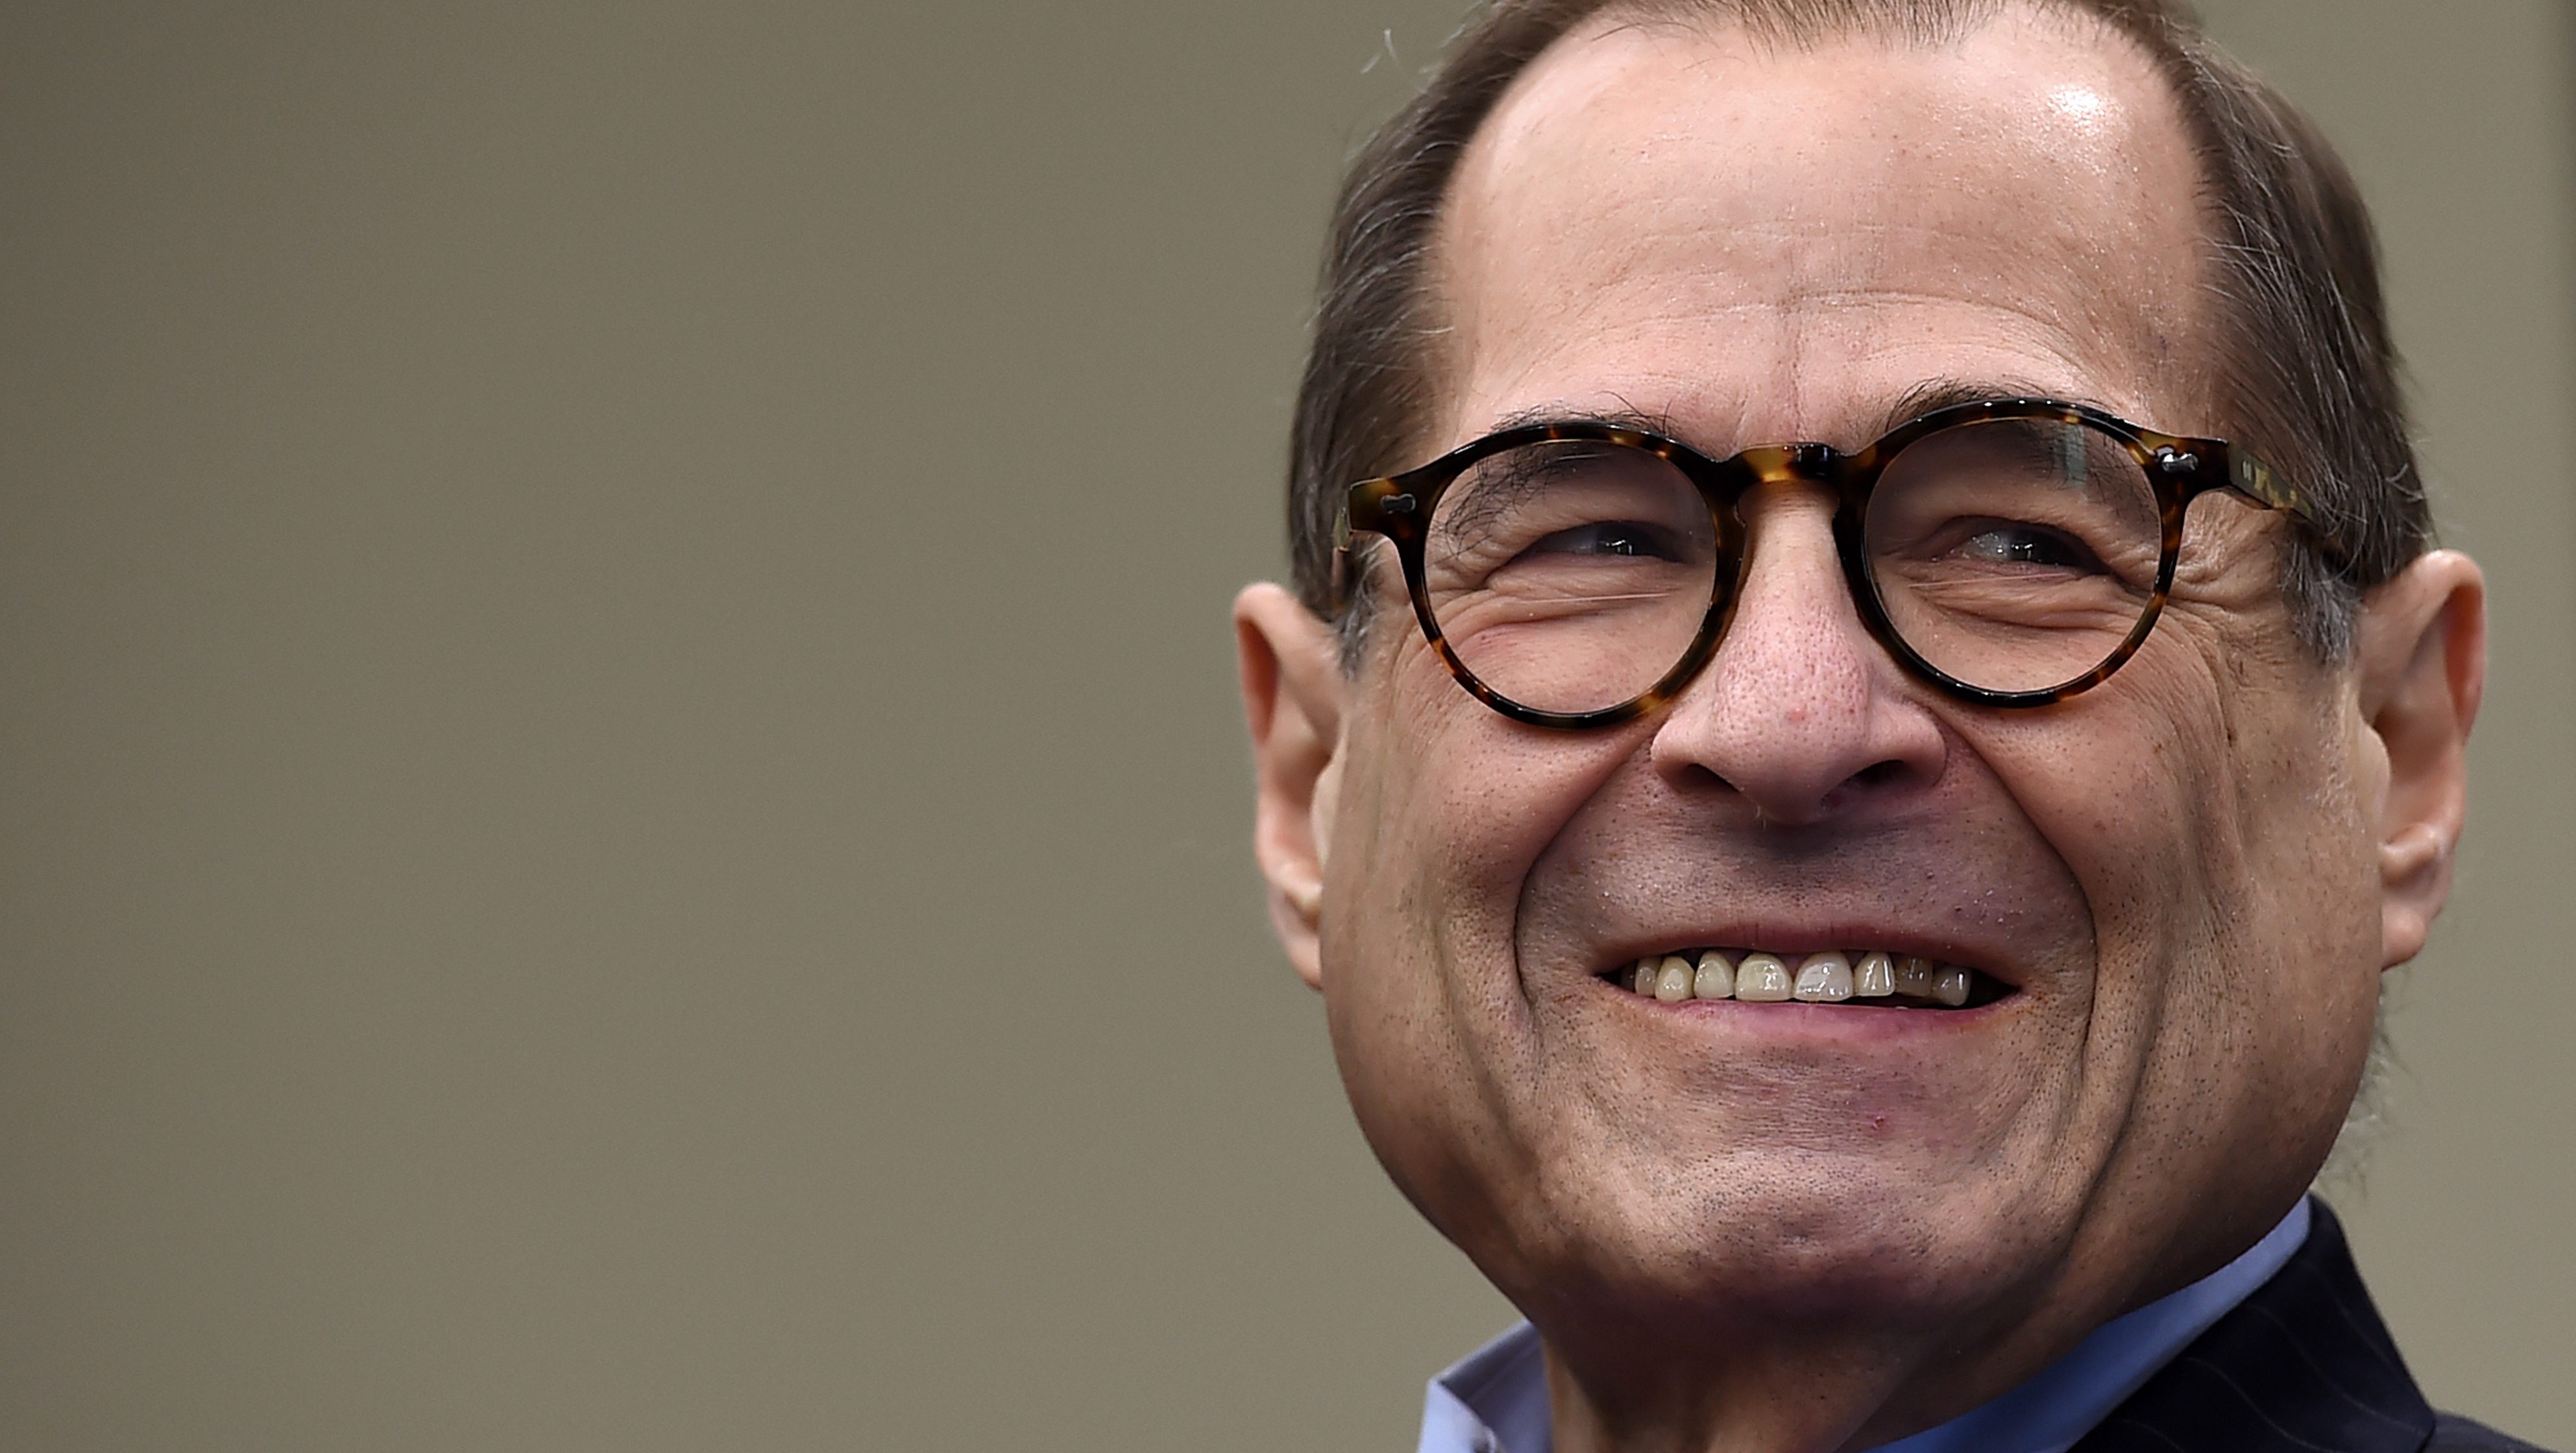 Jerry Nadler's Net Worth 5 Fast Facts You Need to Know